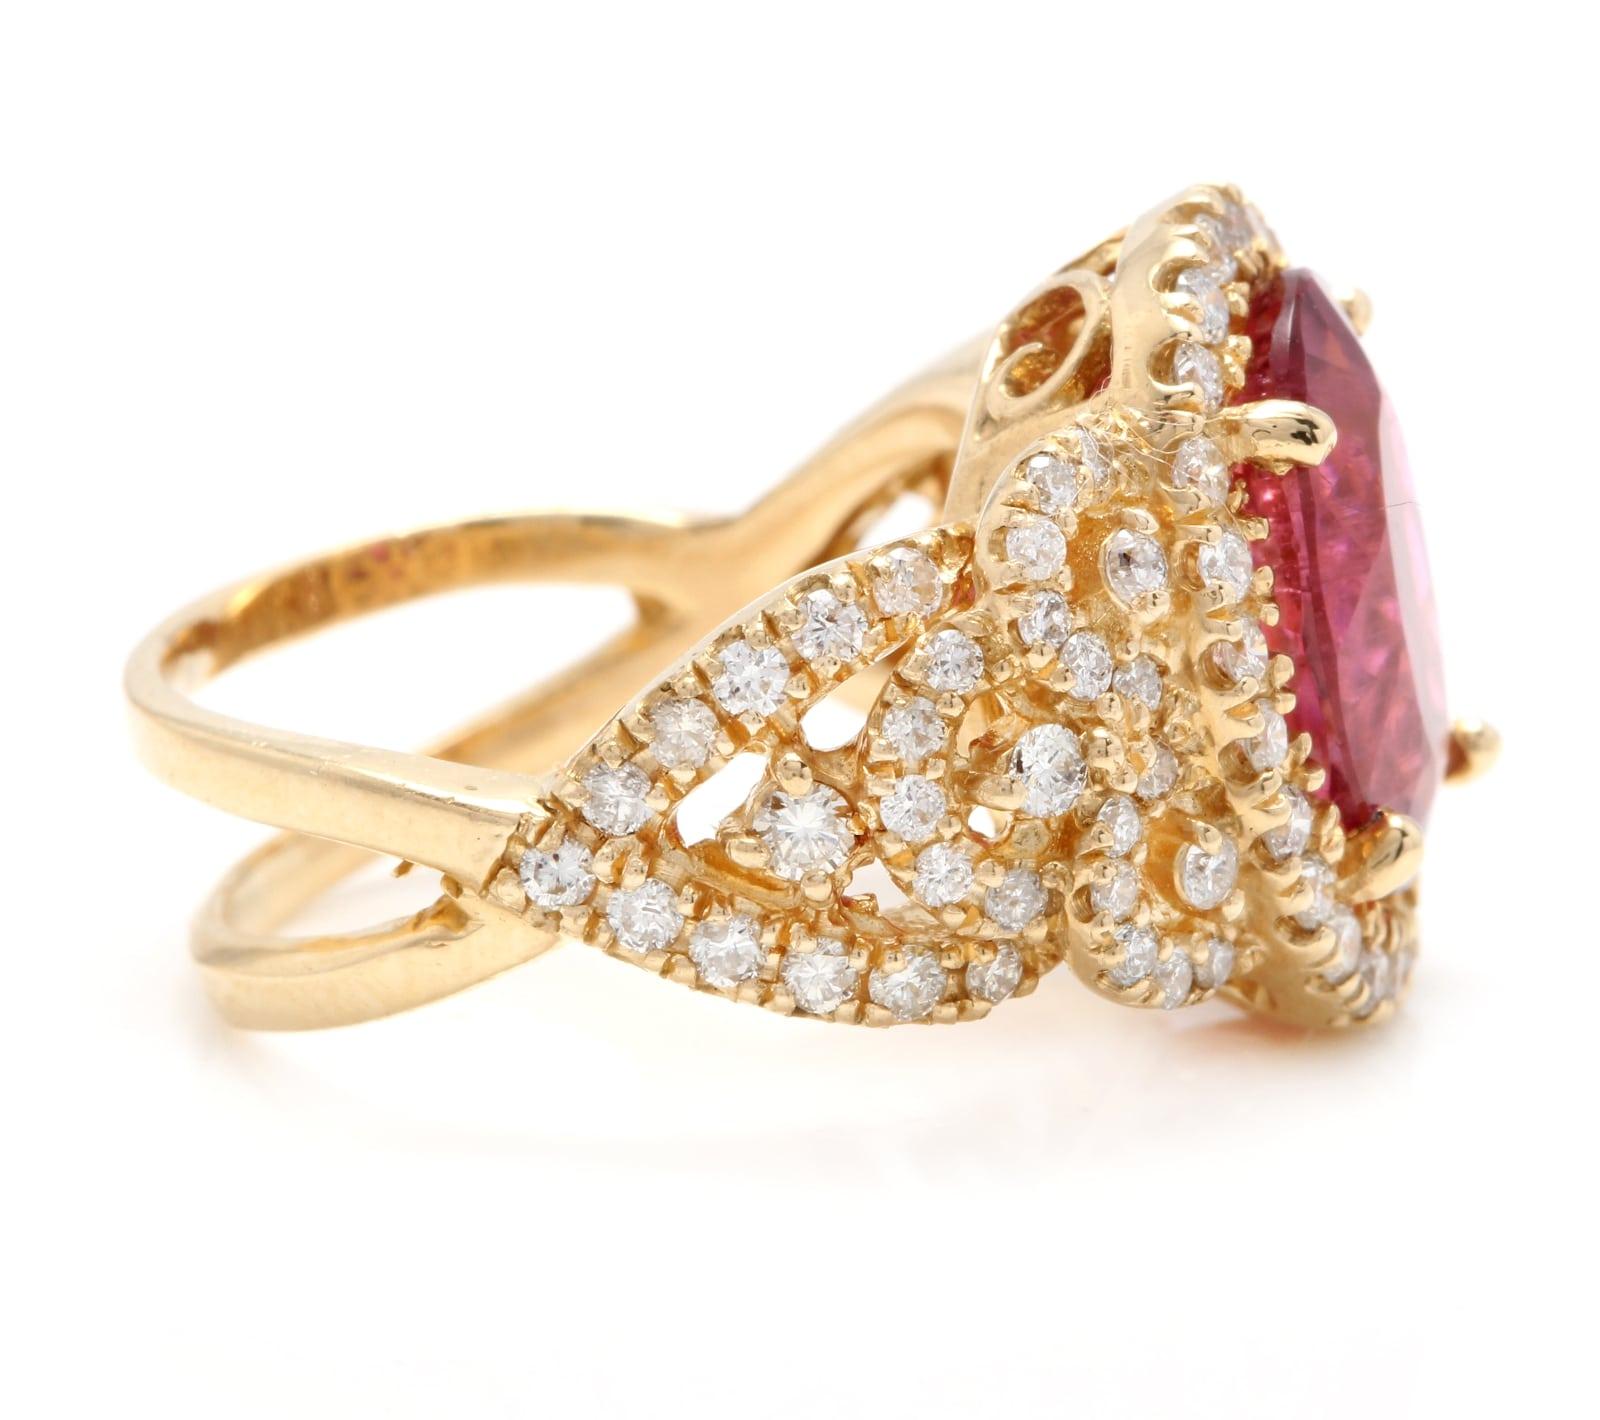 Mixed Cut 6.50 Carat Impressive Natural Rubellite and Diamond 14 Karat Yellow Gold Ring For Sale